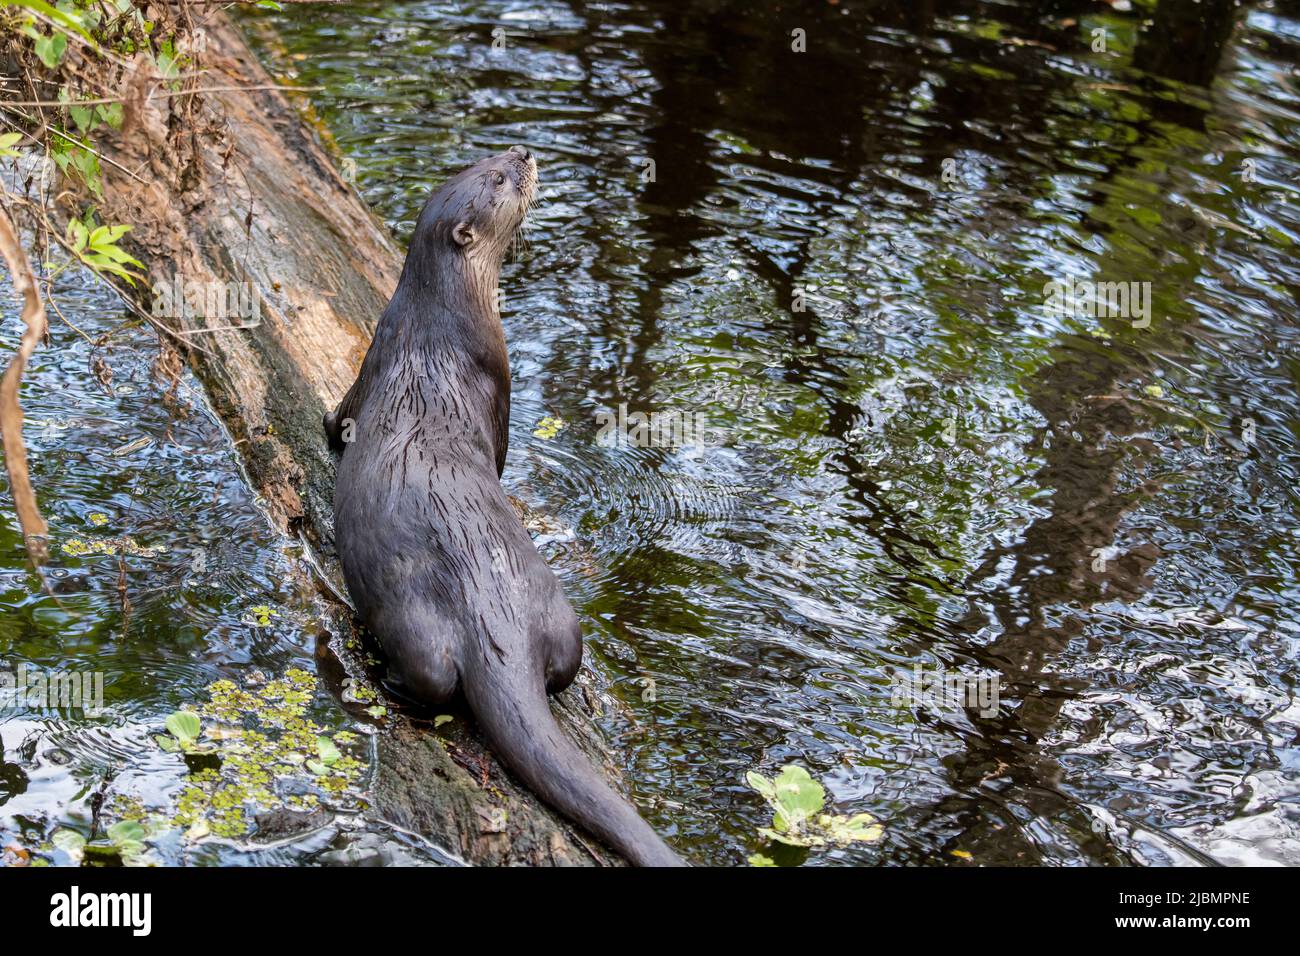 Naples, Florida. Corkscrew swamp sanctuary. River Otter, (Lutra canadensis) on a fallen tree in the swamp watching for predators. Stock Photo